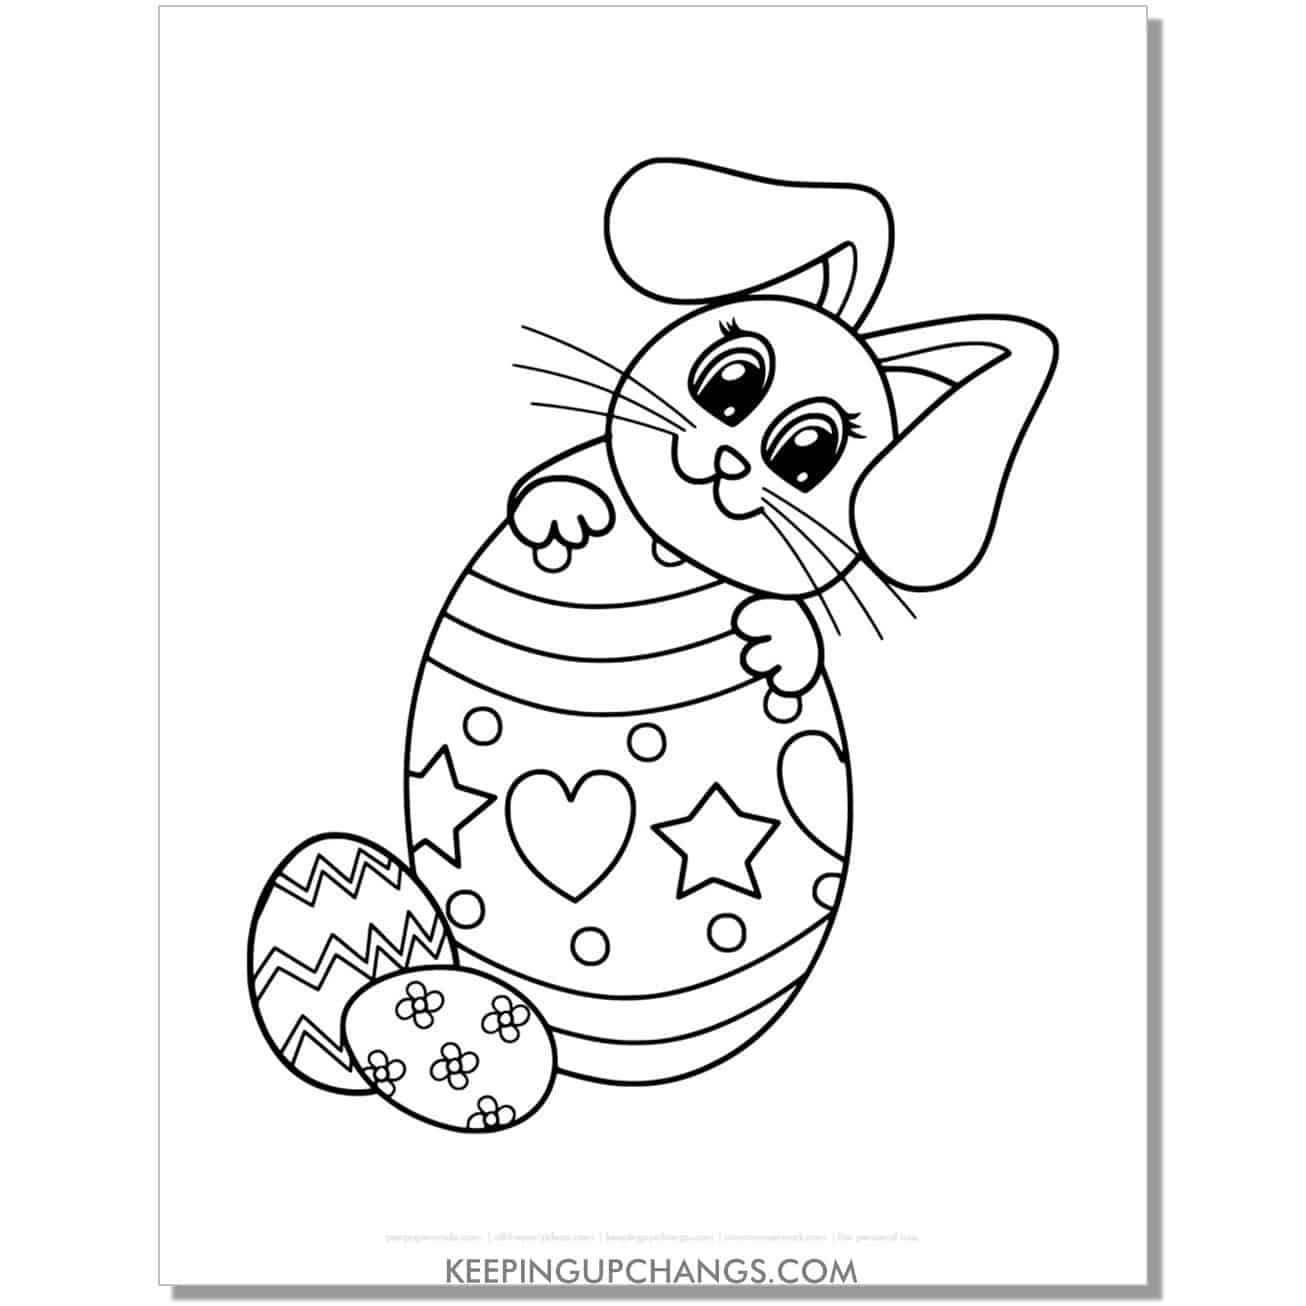 kawaii easter bunny with eggs coloring page, sheet.